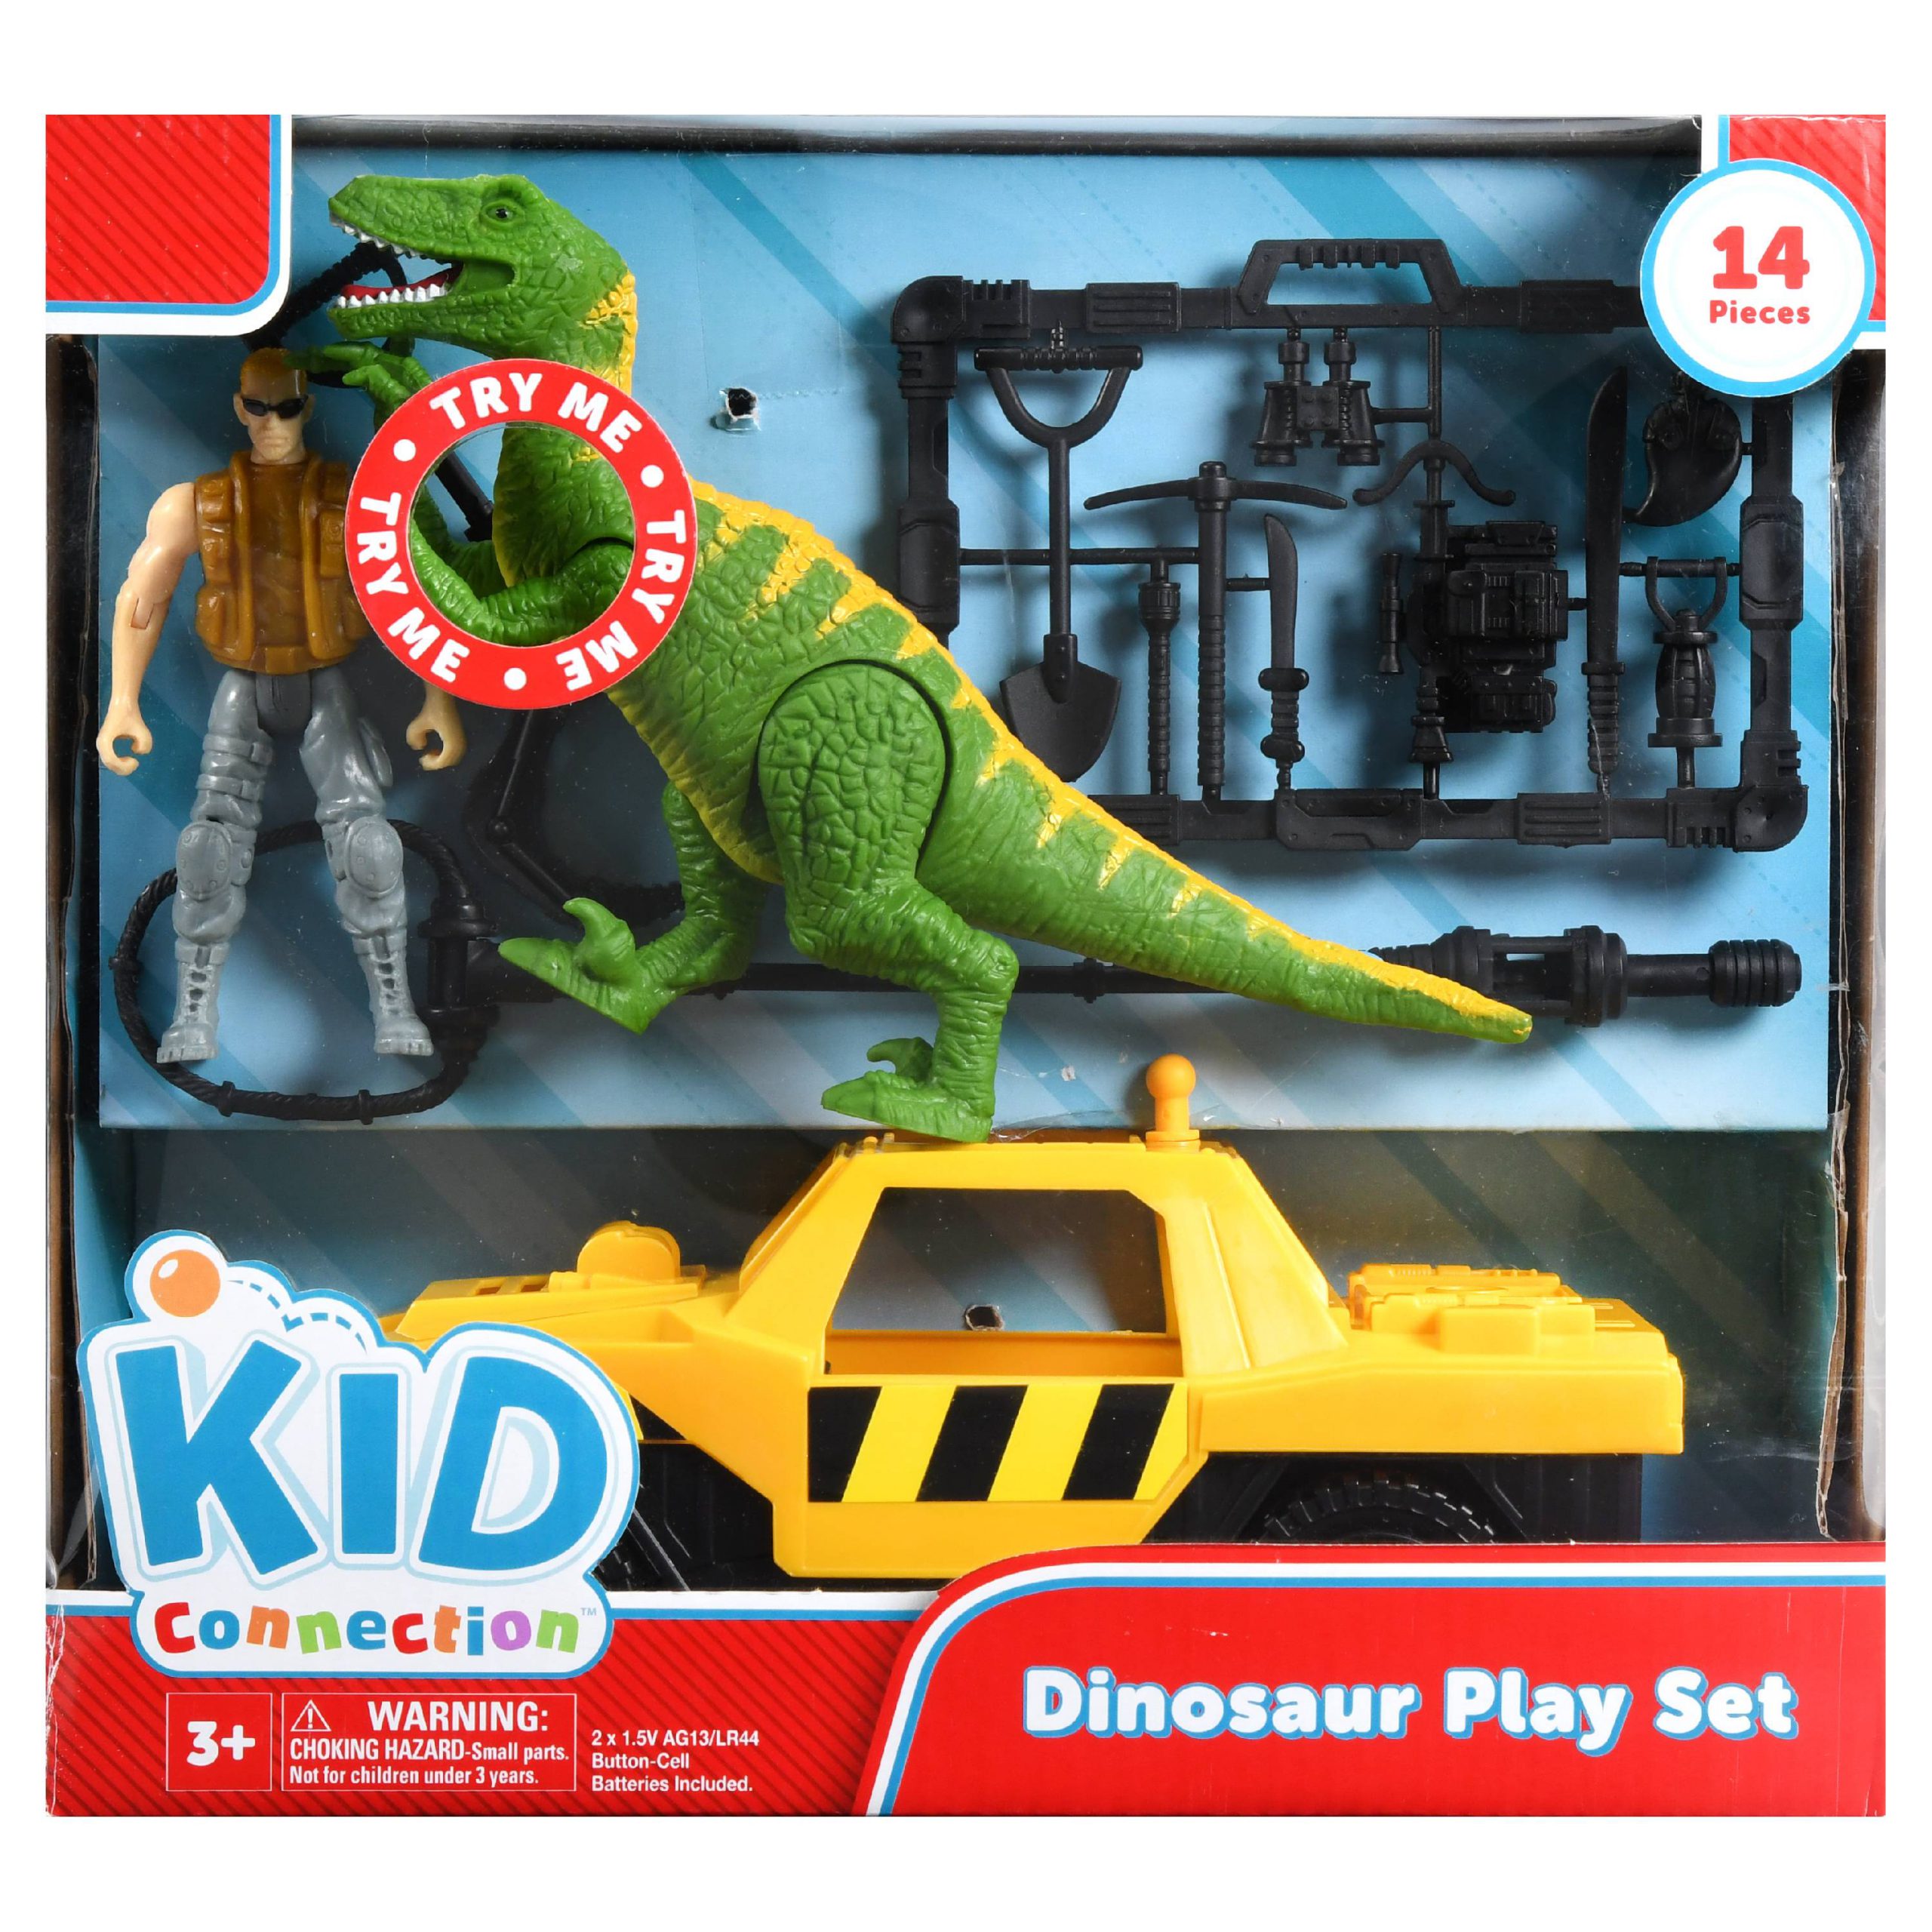 Kid Connection Dinosaur Play Set, 3+ Years, 14 Pieces (Styles May Vary)